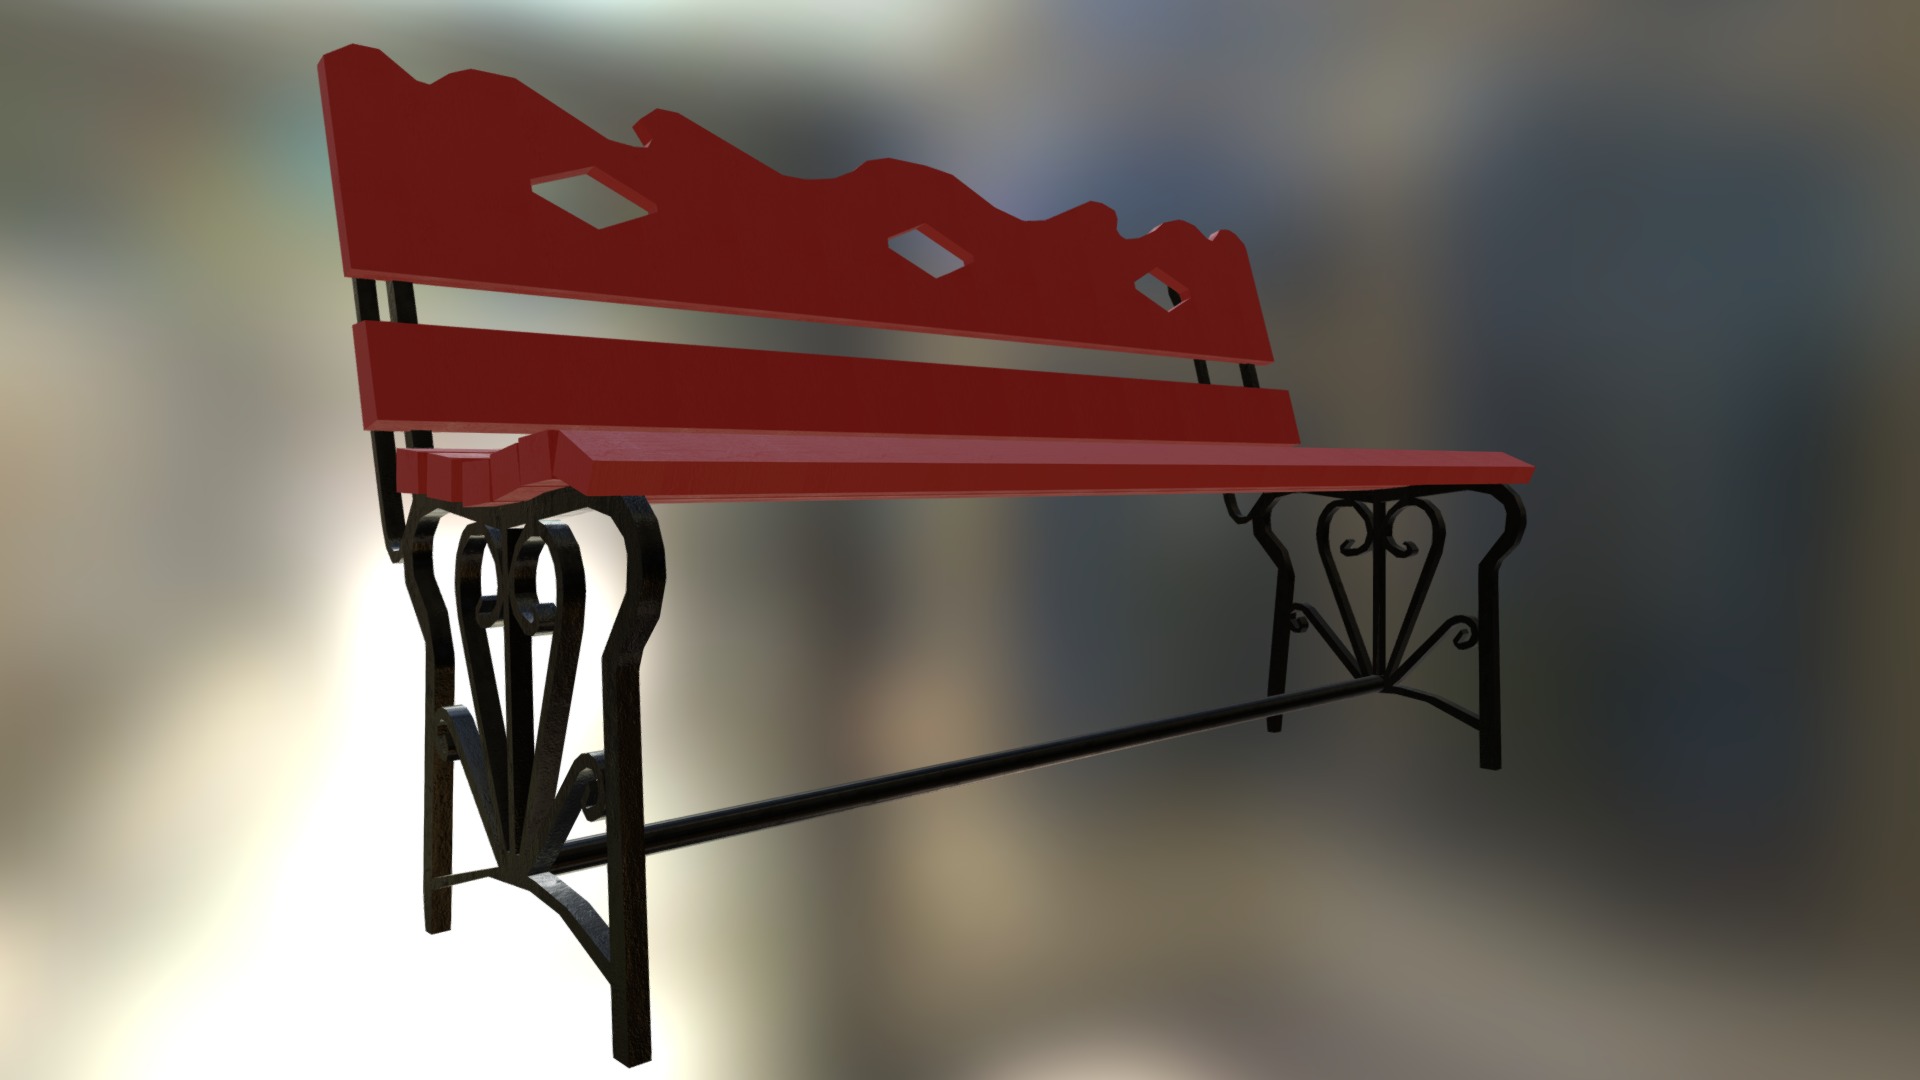 3D model Lavka - This is a 3D model of the Lavka. The 3D model is about a red and black table.